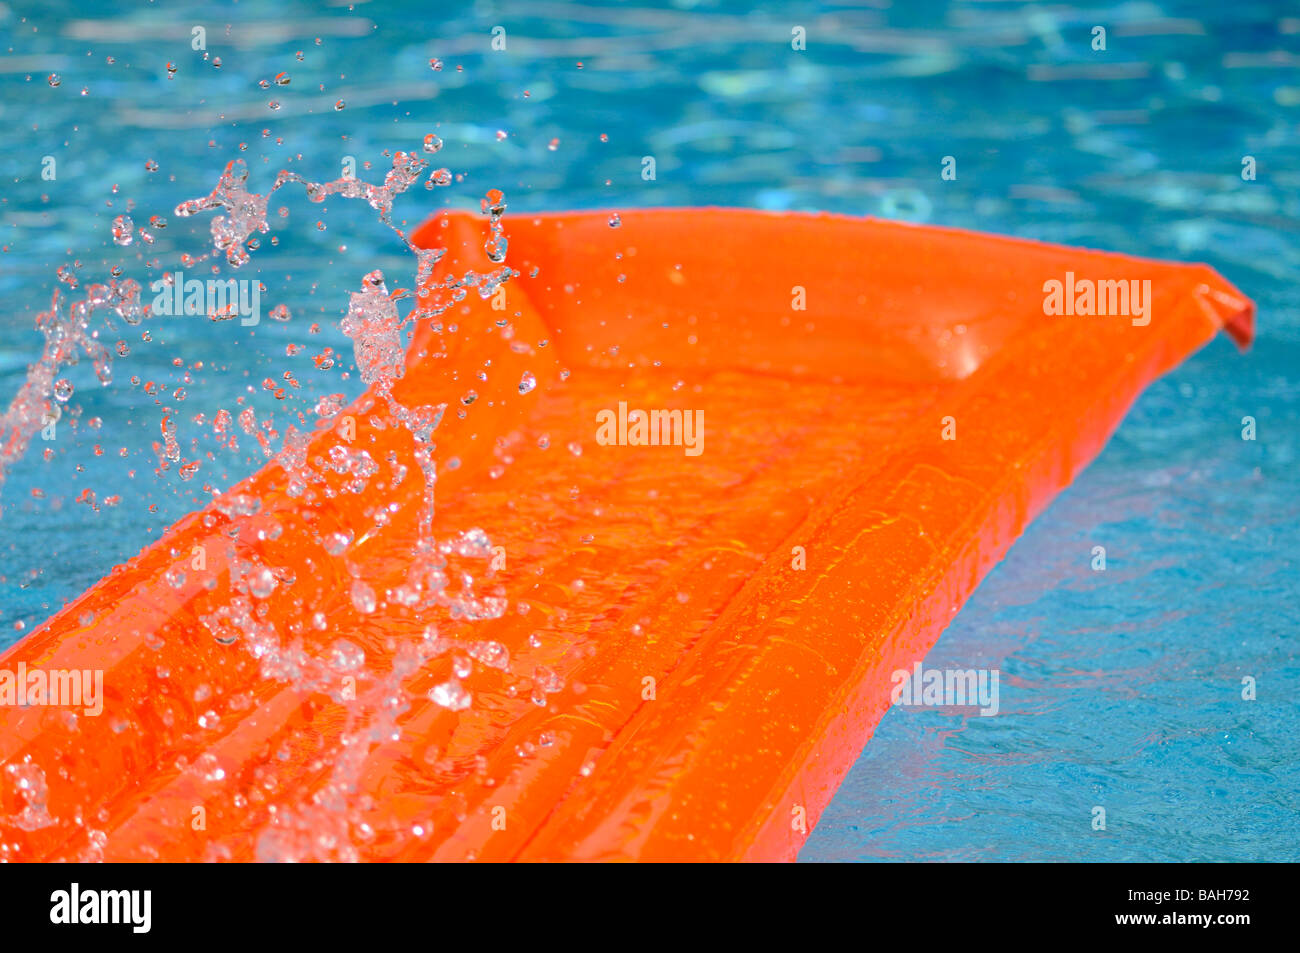 Splashed water over an orange air bed floating in a swimming pool. Stock Photo